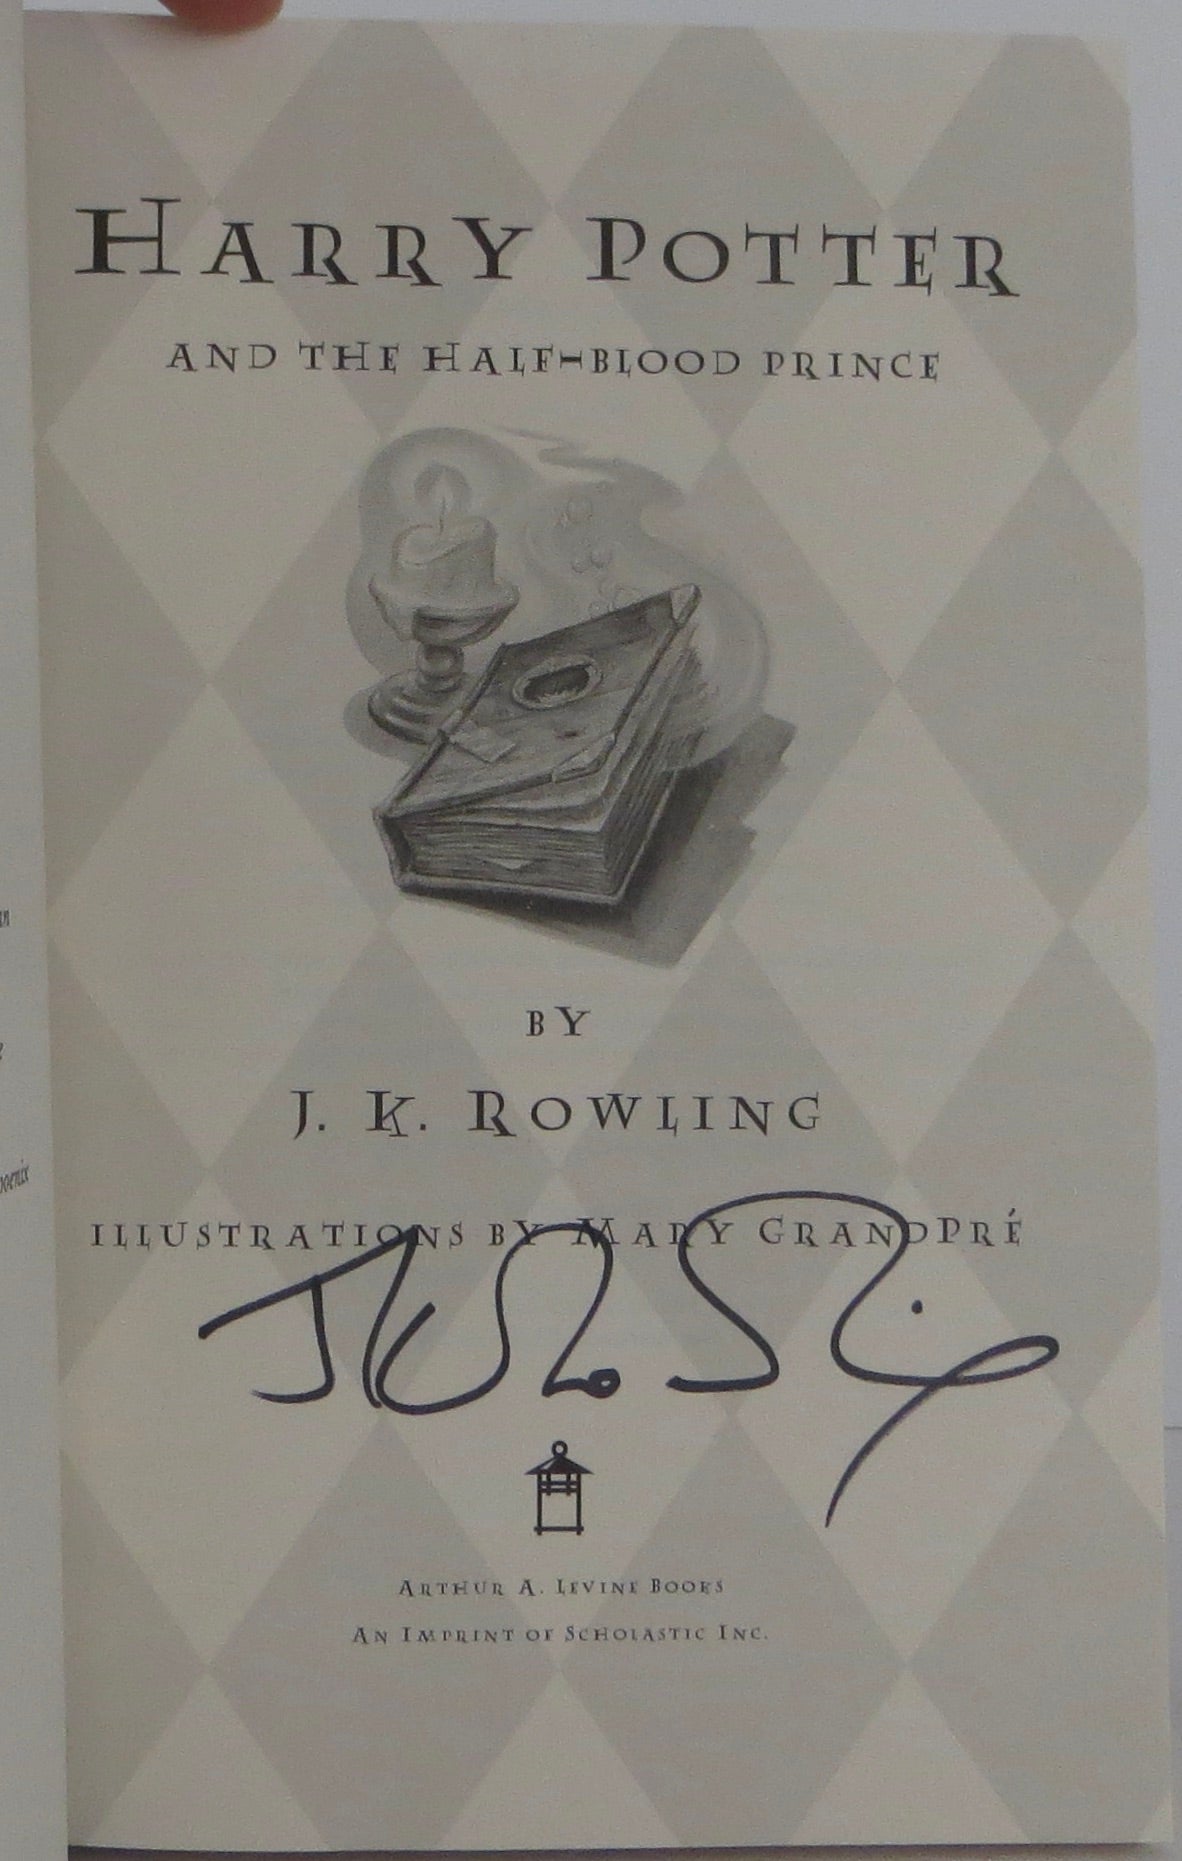 Scholastic Inc. Harry Potter and the Half-Blood Prince (Harry